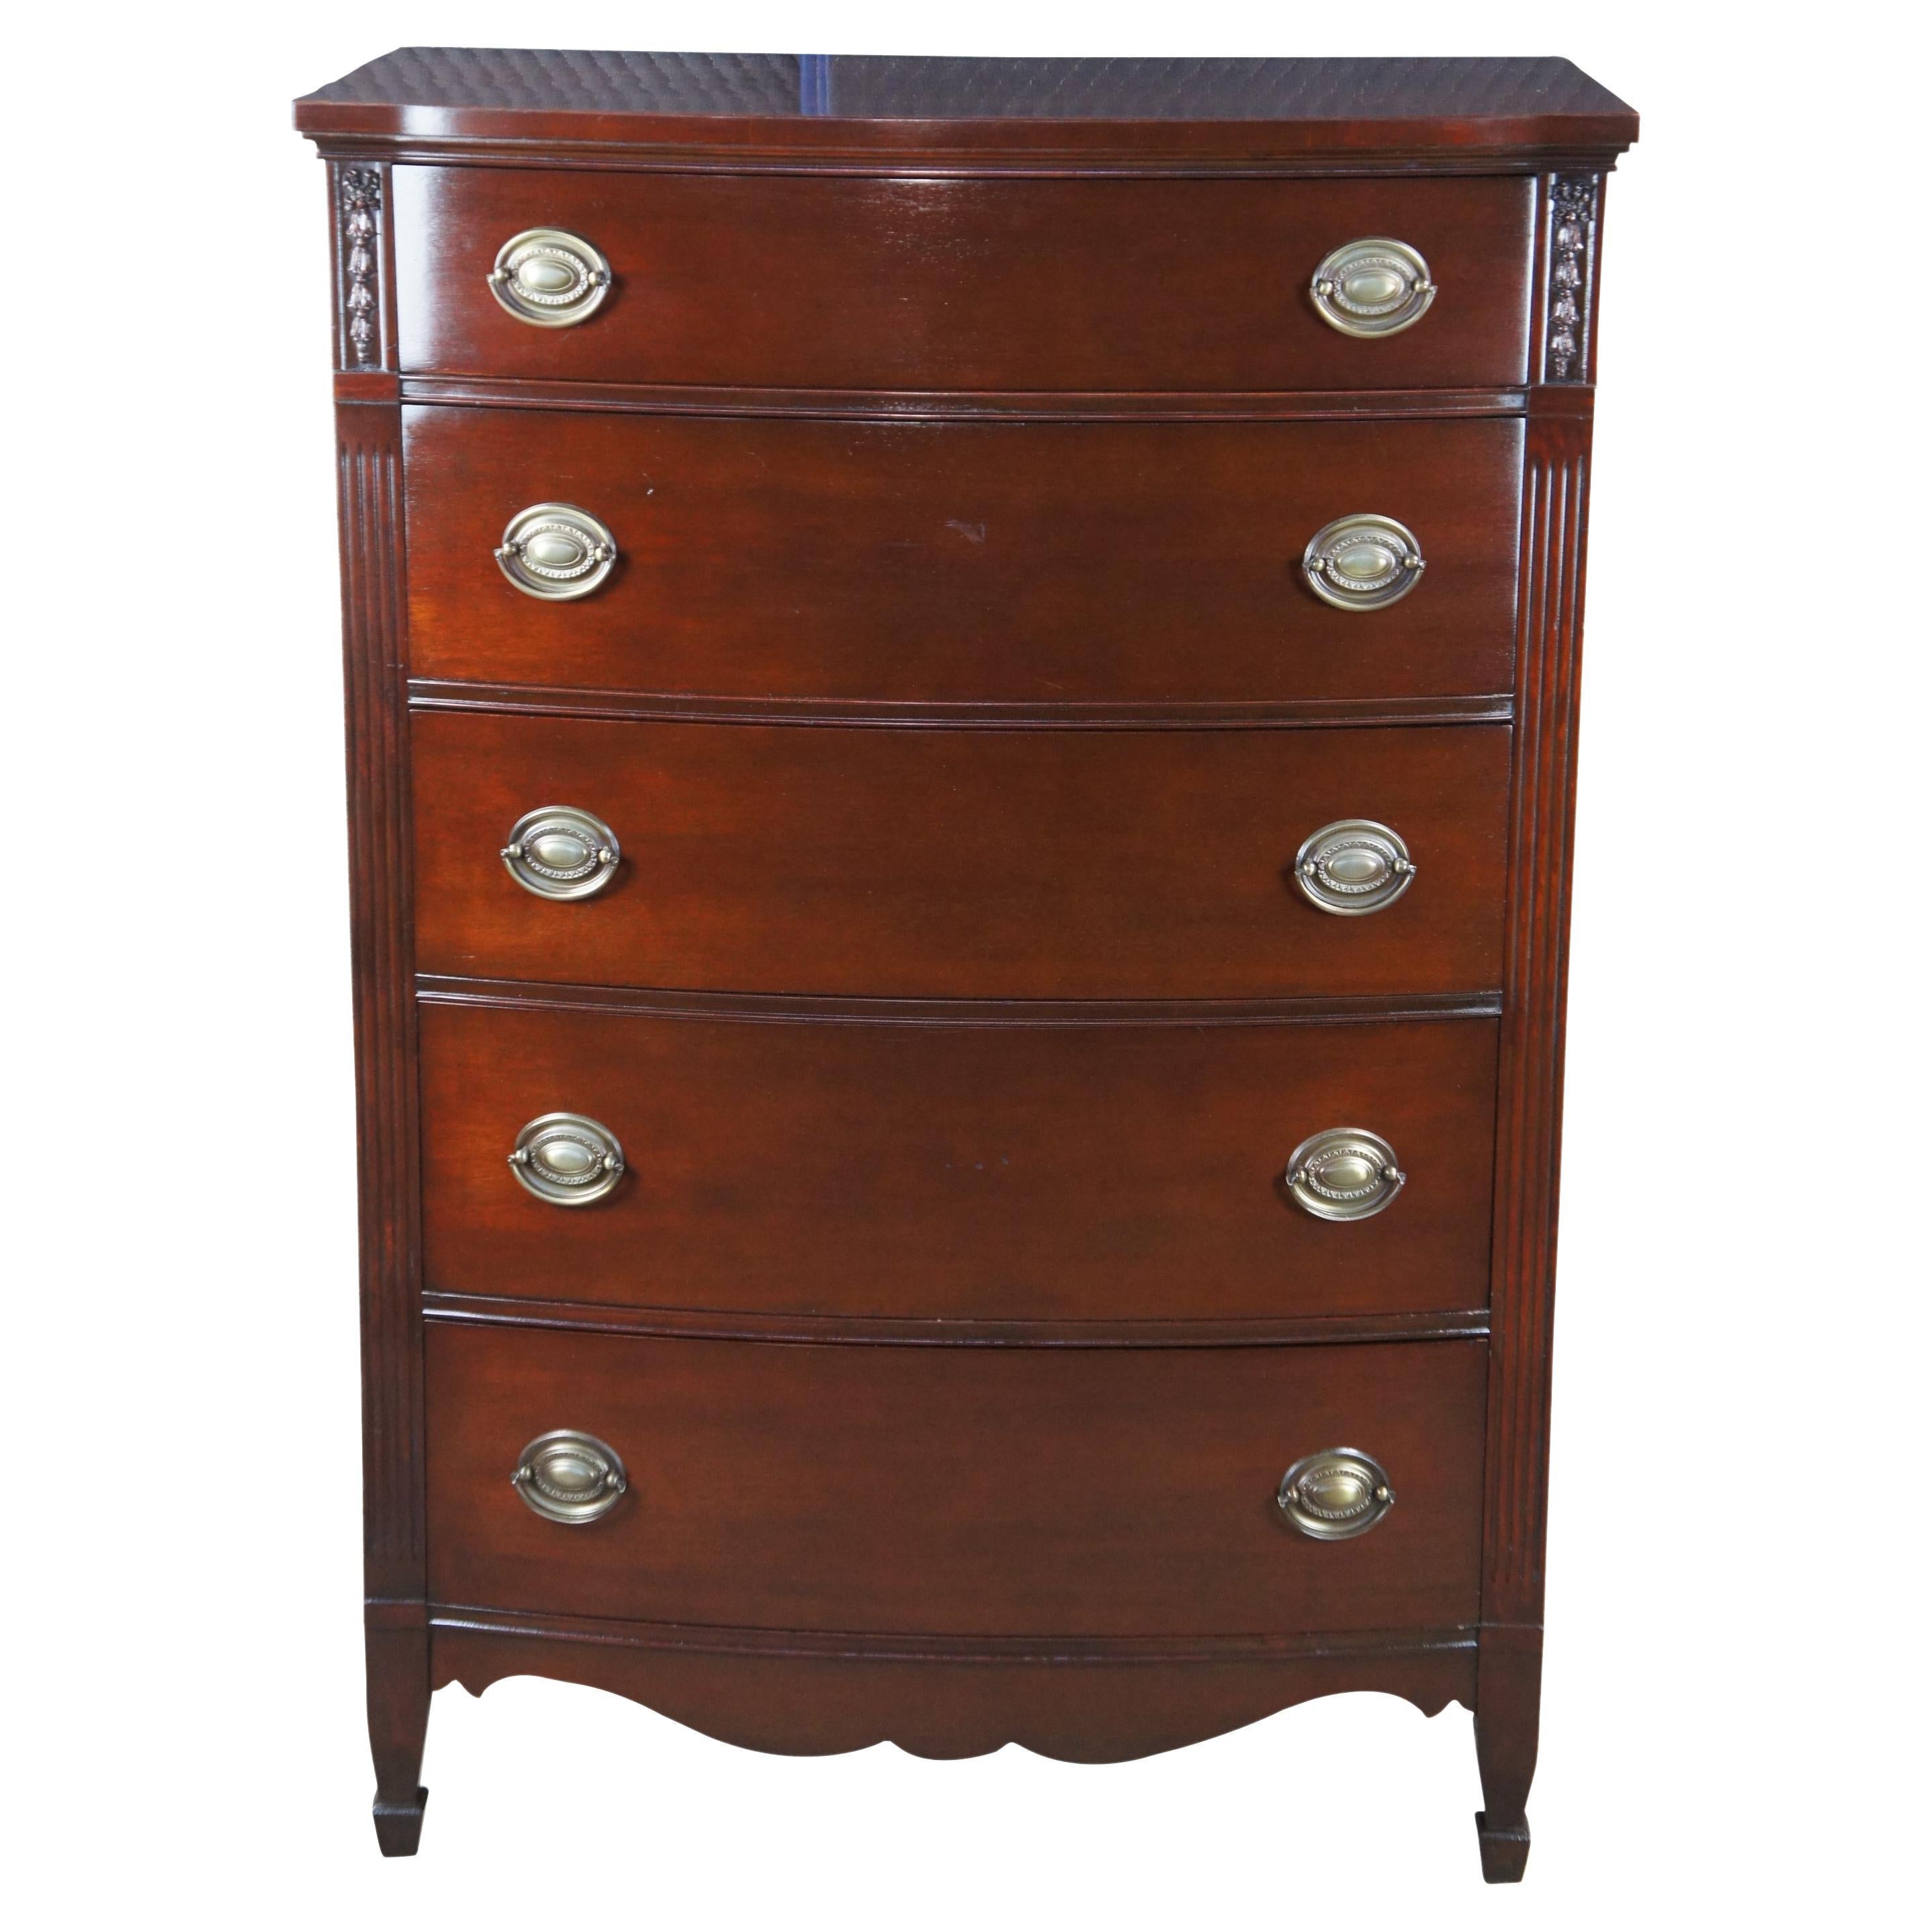 Antique Huntley Sheraton Mahogany Bowfront Chest of Drawers Tallboy Dresser